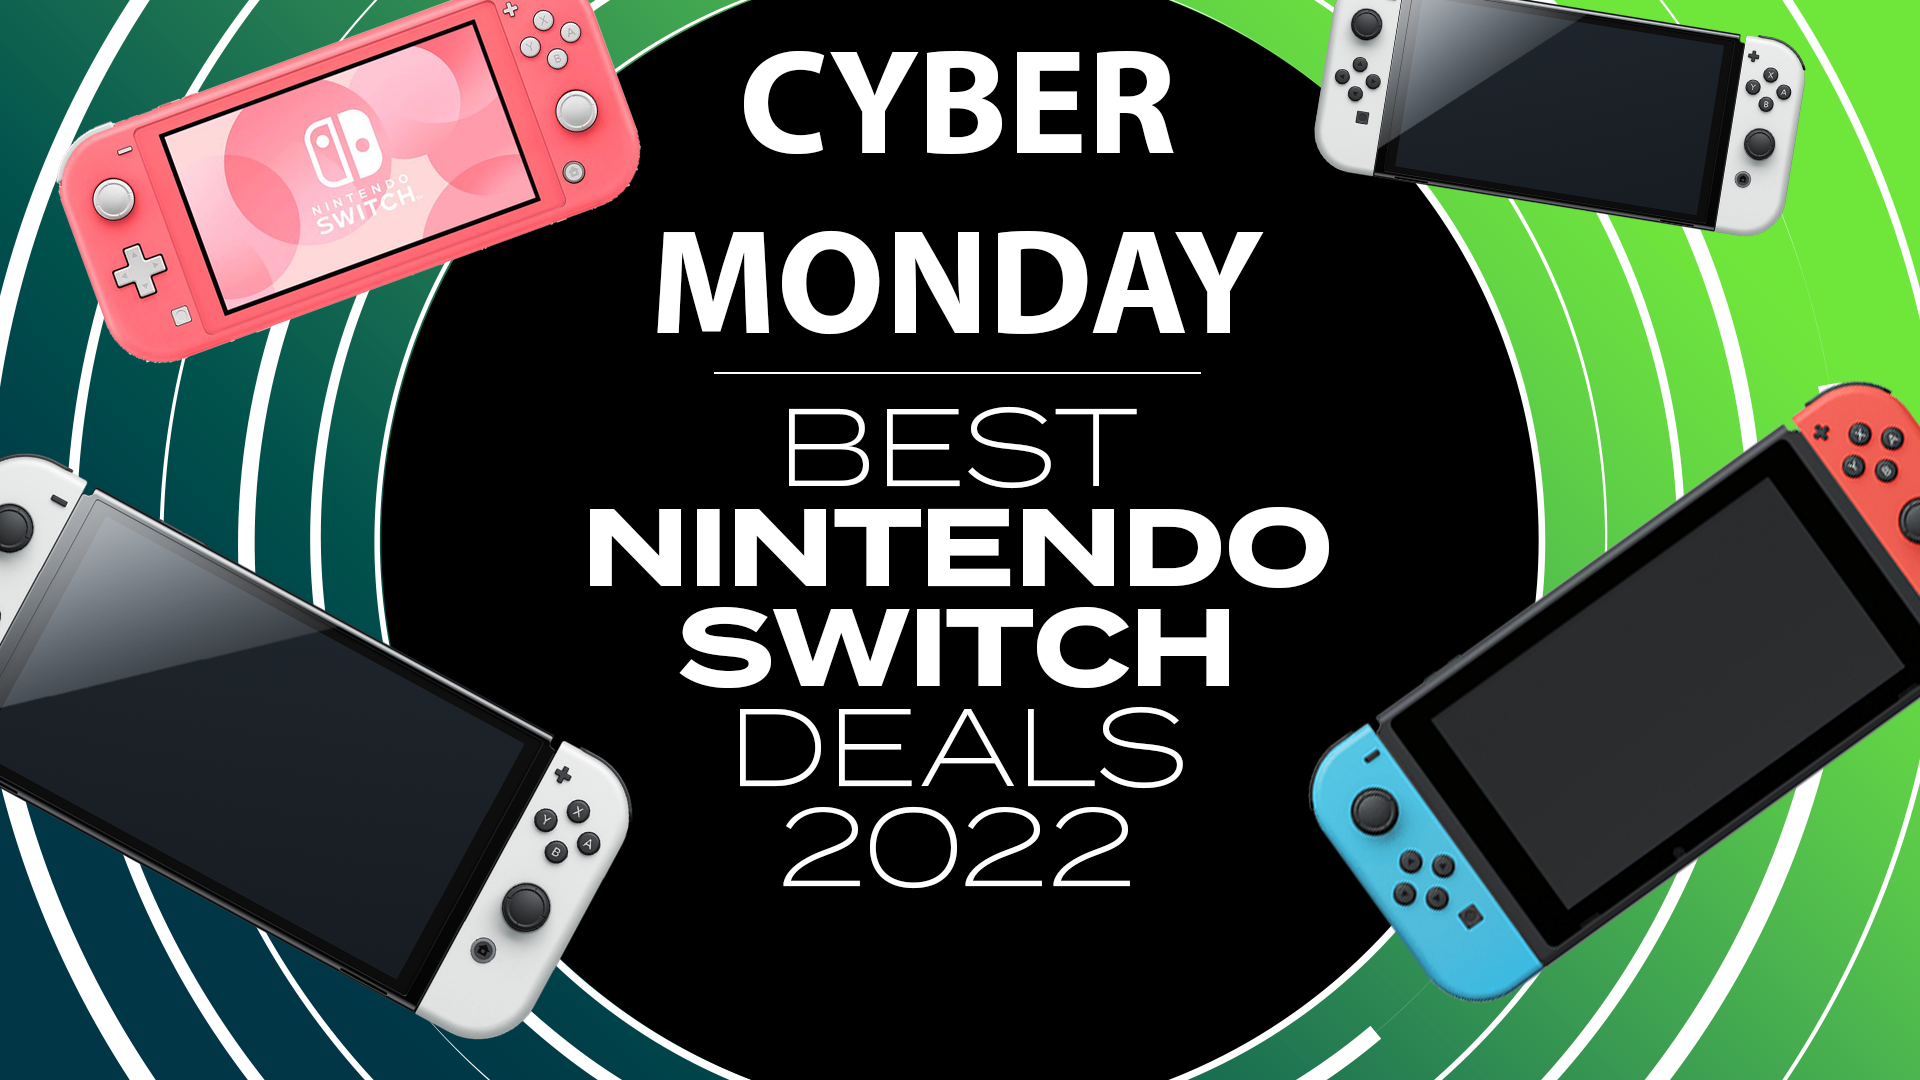 Image for Cyber Monday Nintendo Switch deals 2022: best offers and discounts